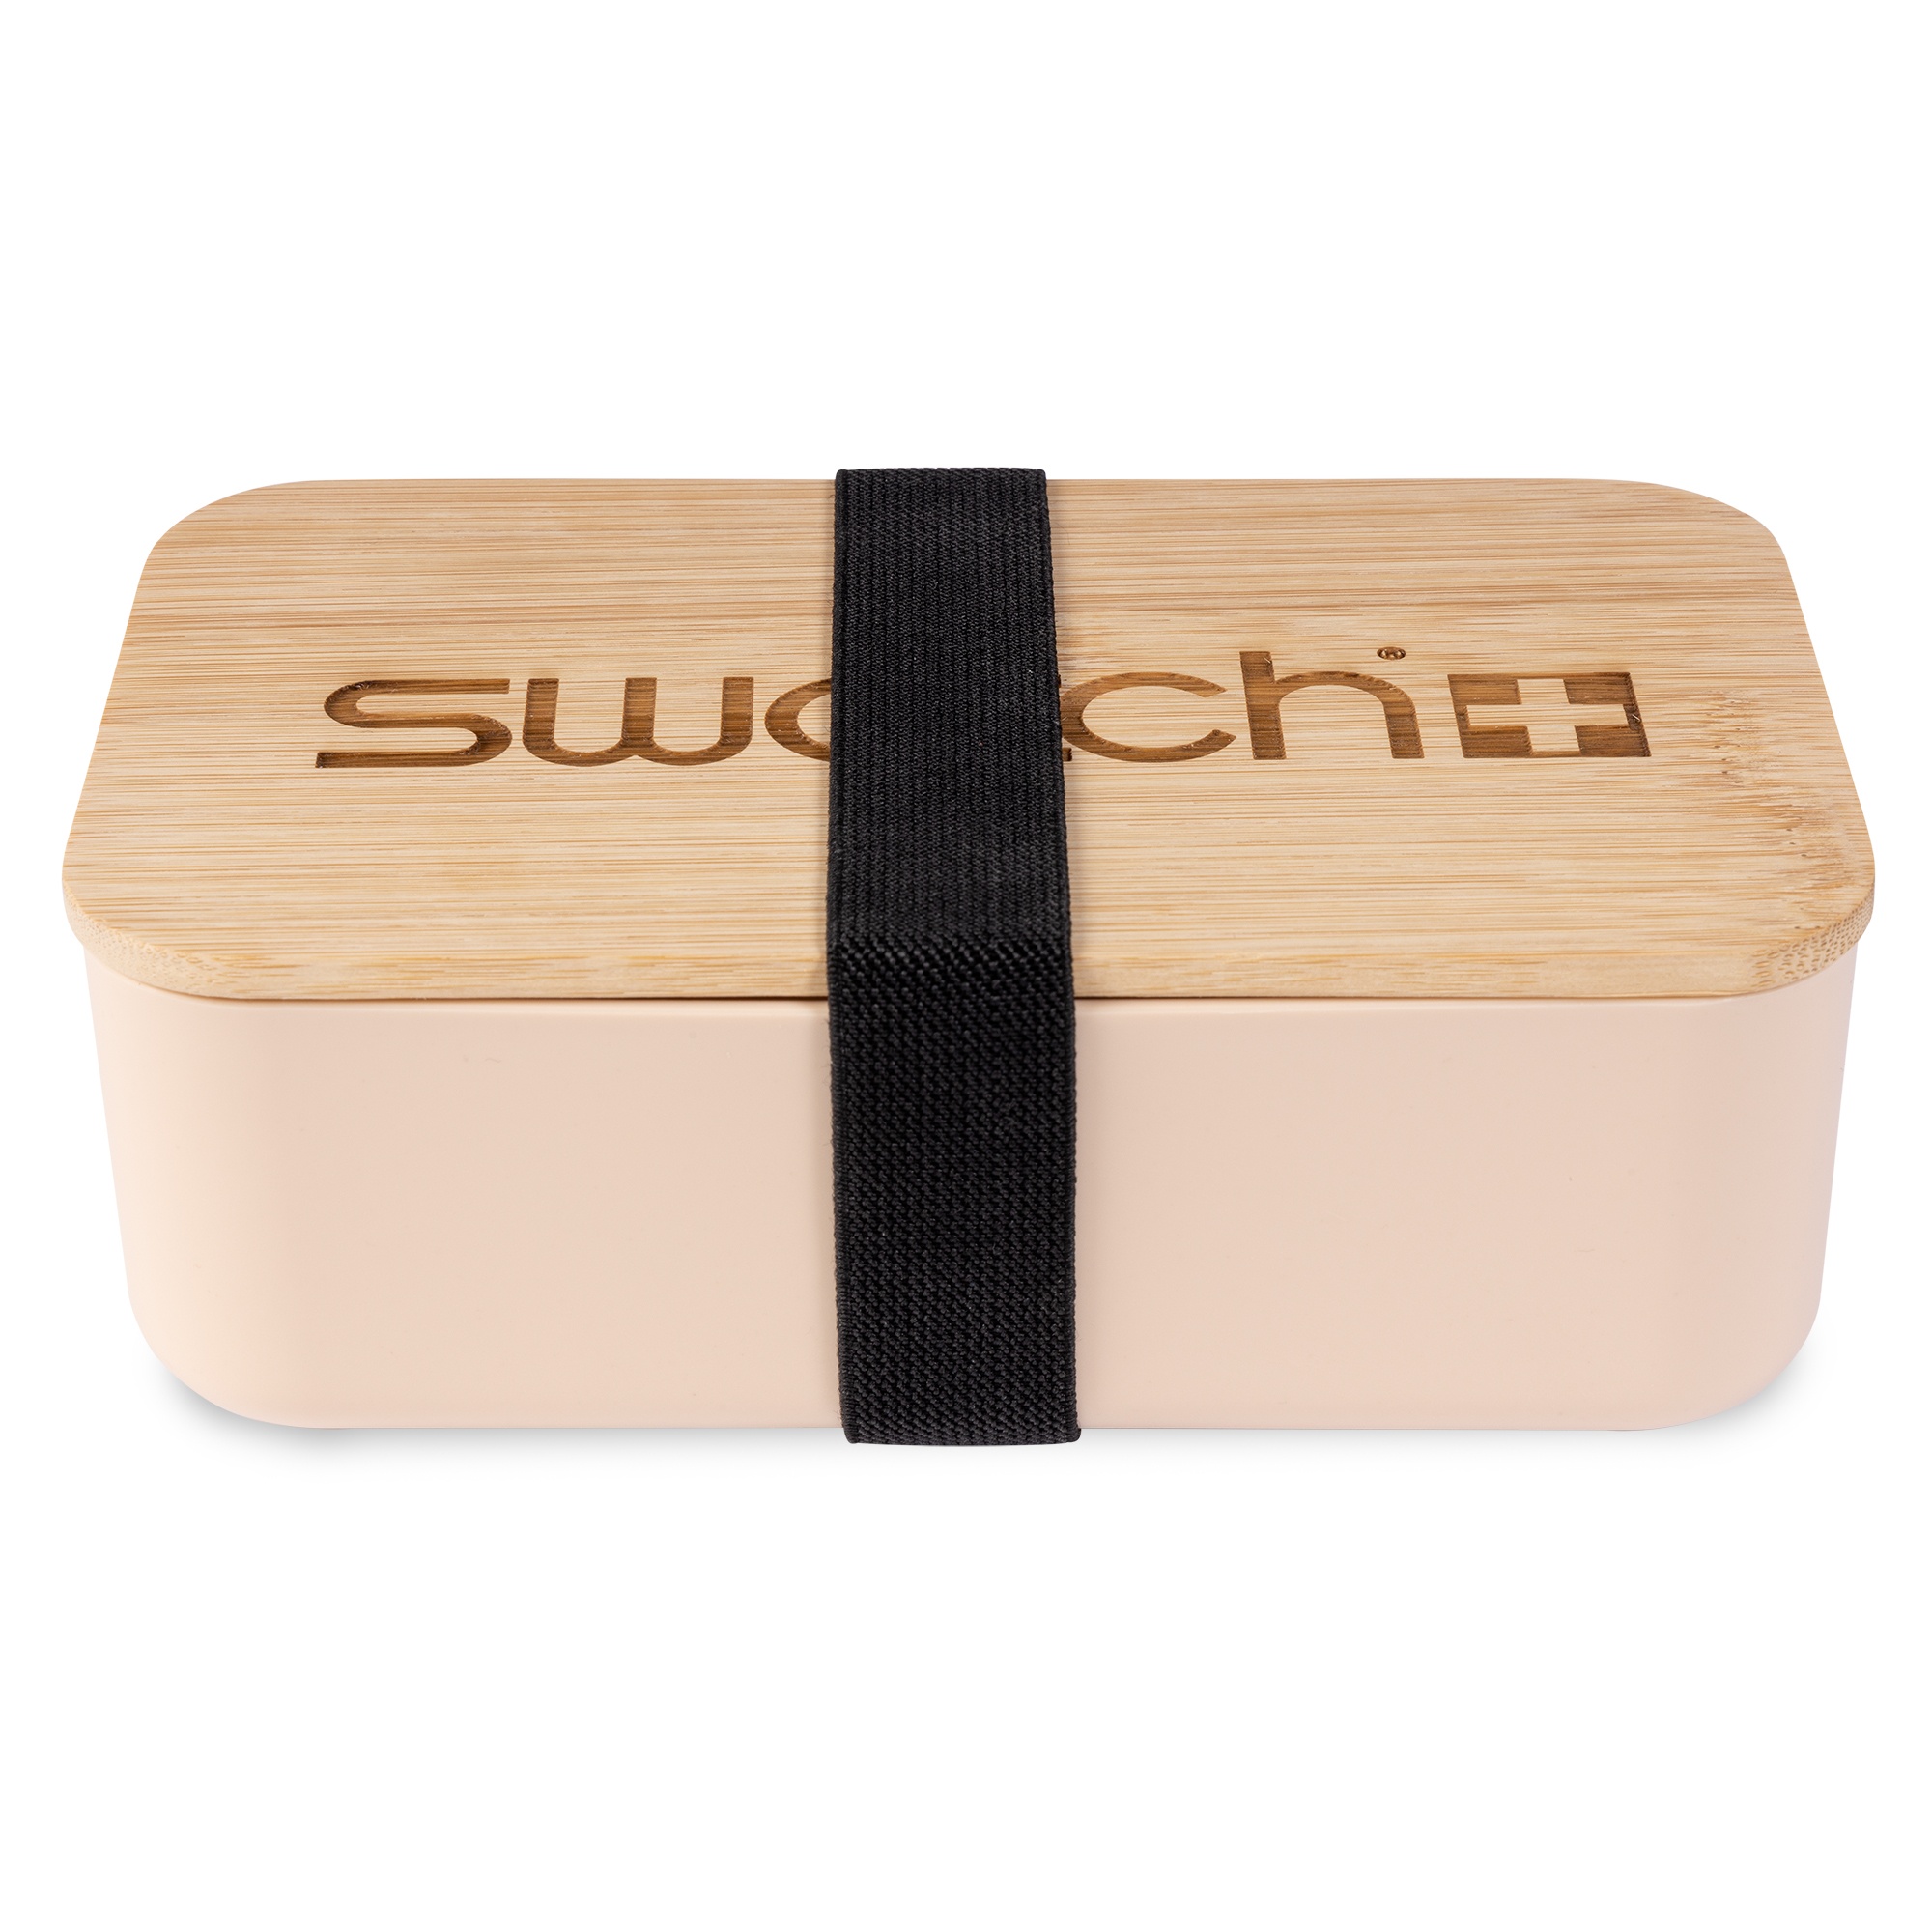 NC Custom: Bamboo Lid Bento Box Candy And Snacks Gift Set. Supplied By:  Lanco